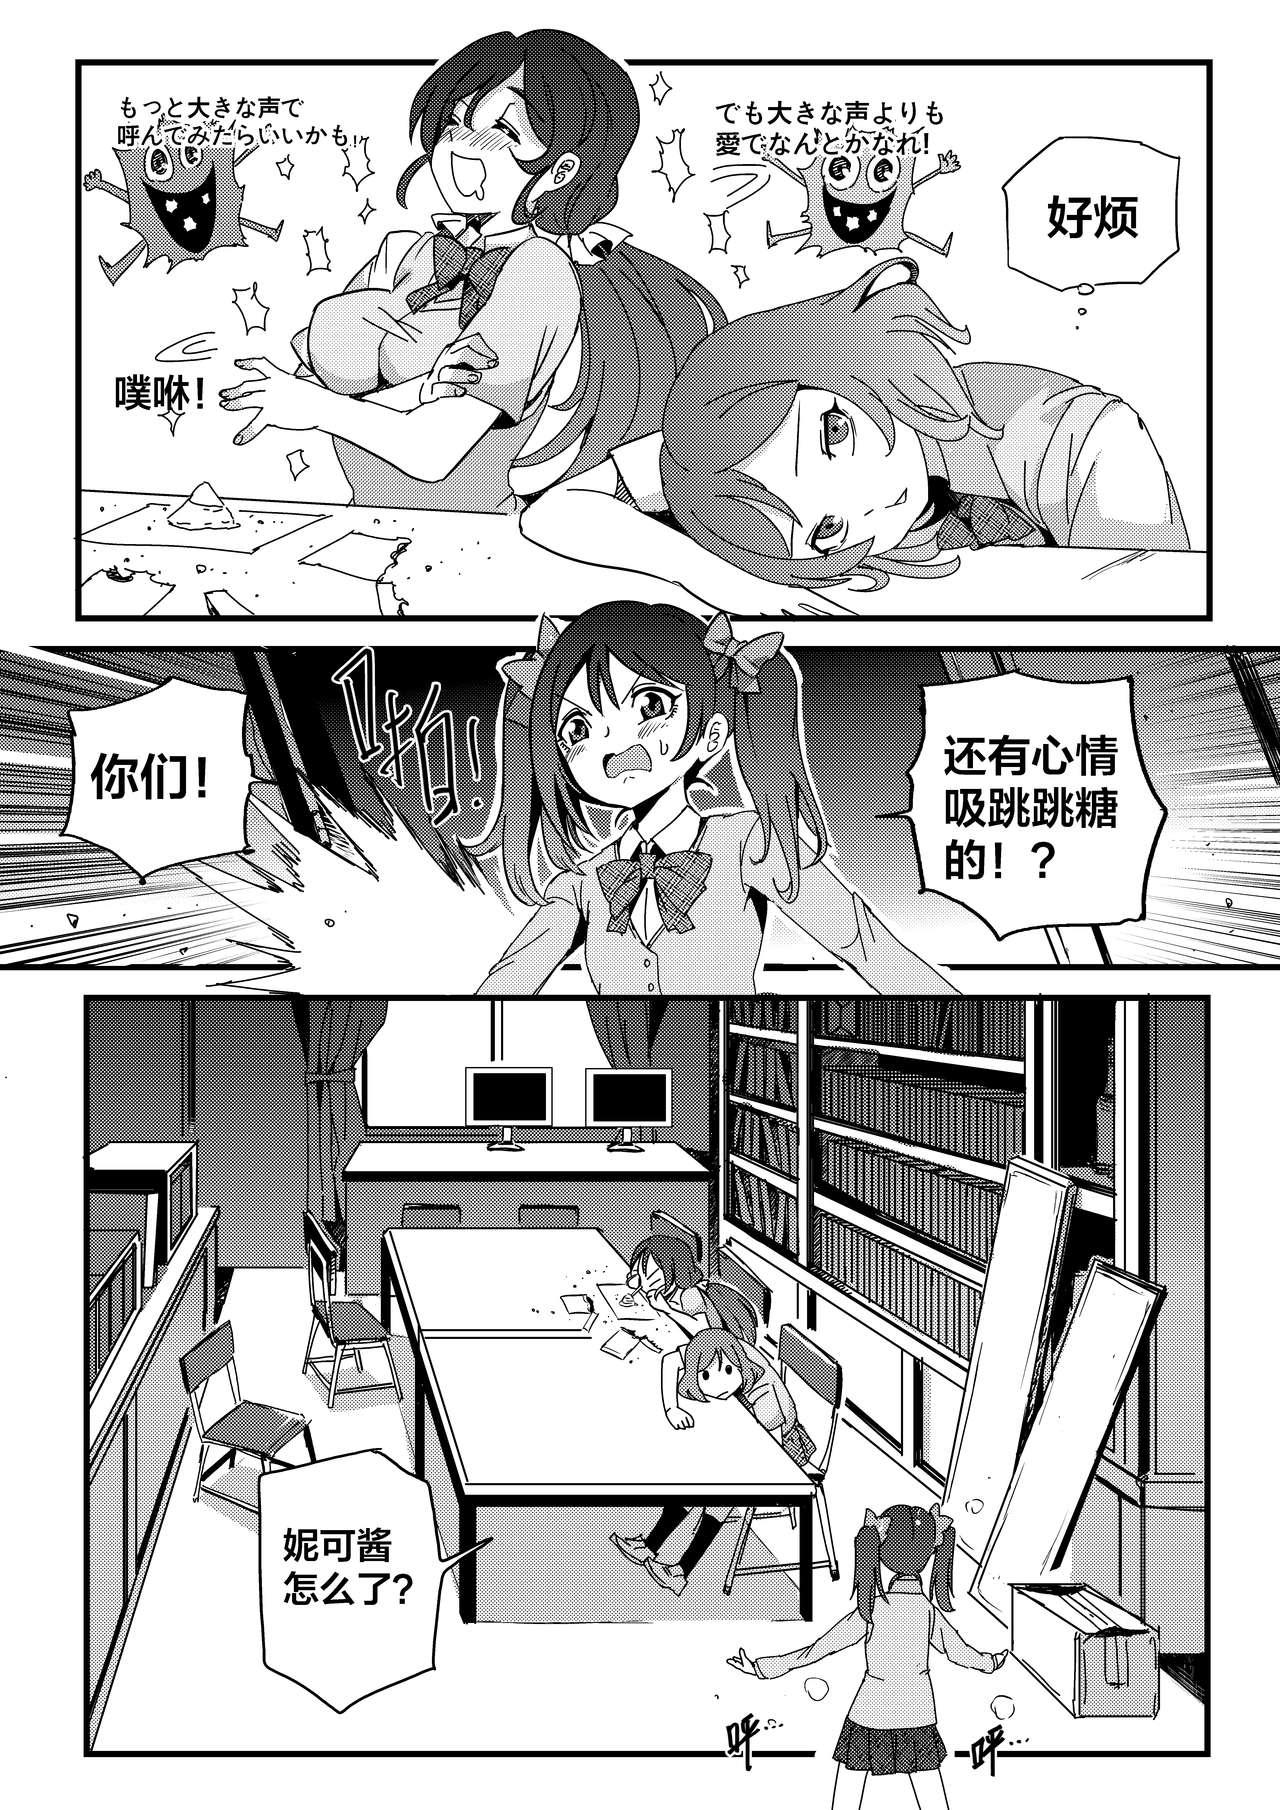 Perra 果胆卯威 - Kantai collection The idolmaster Love live Titten - Page 2